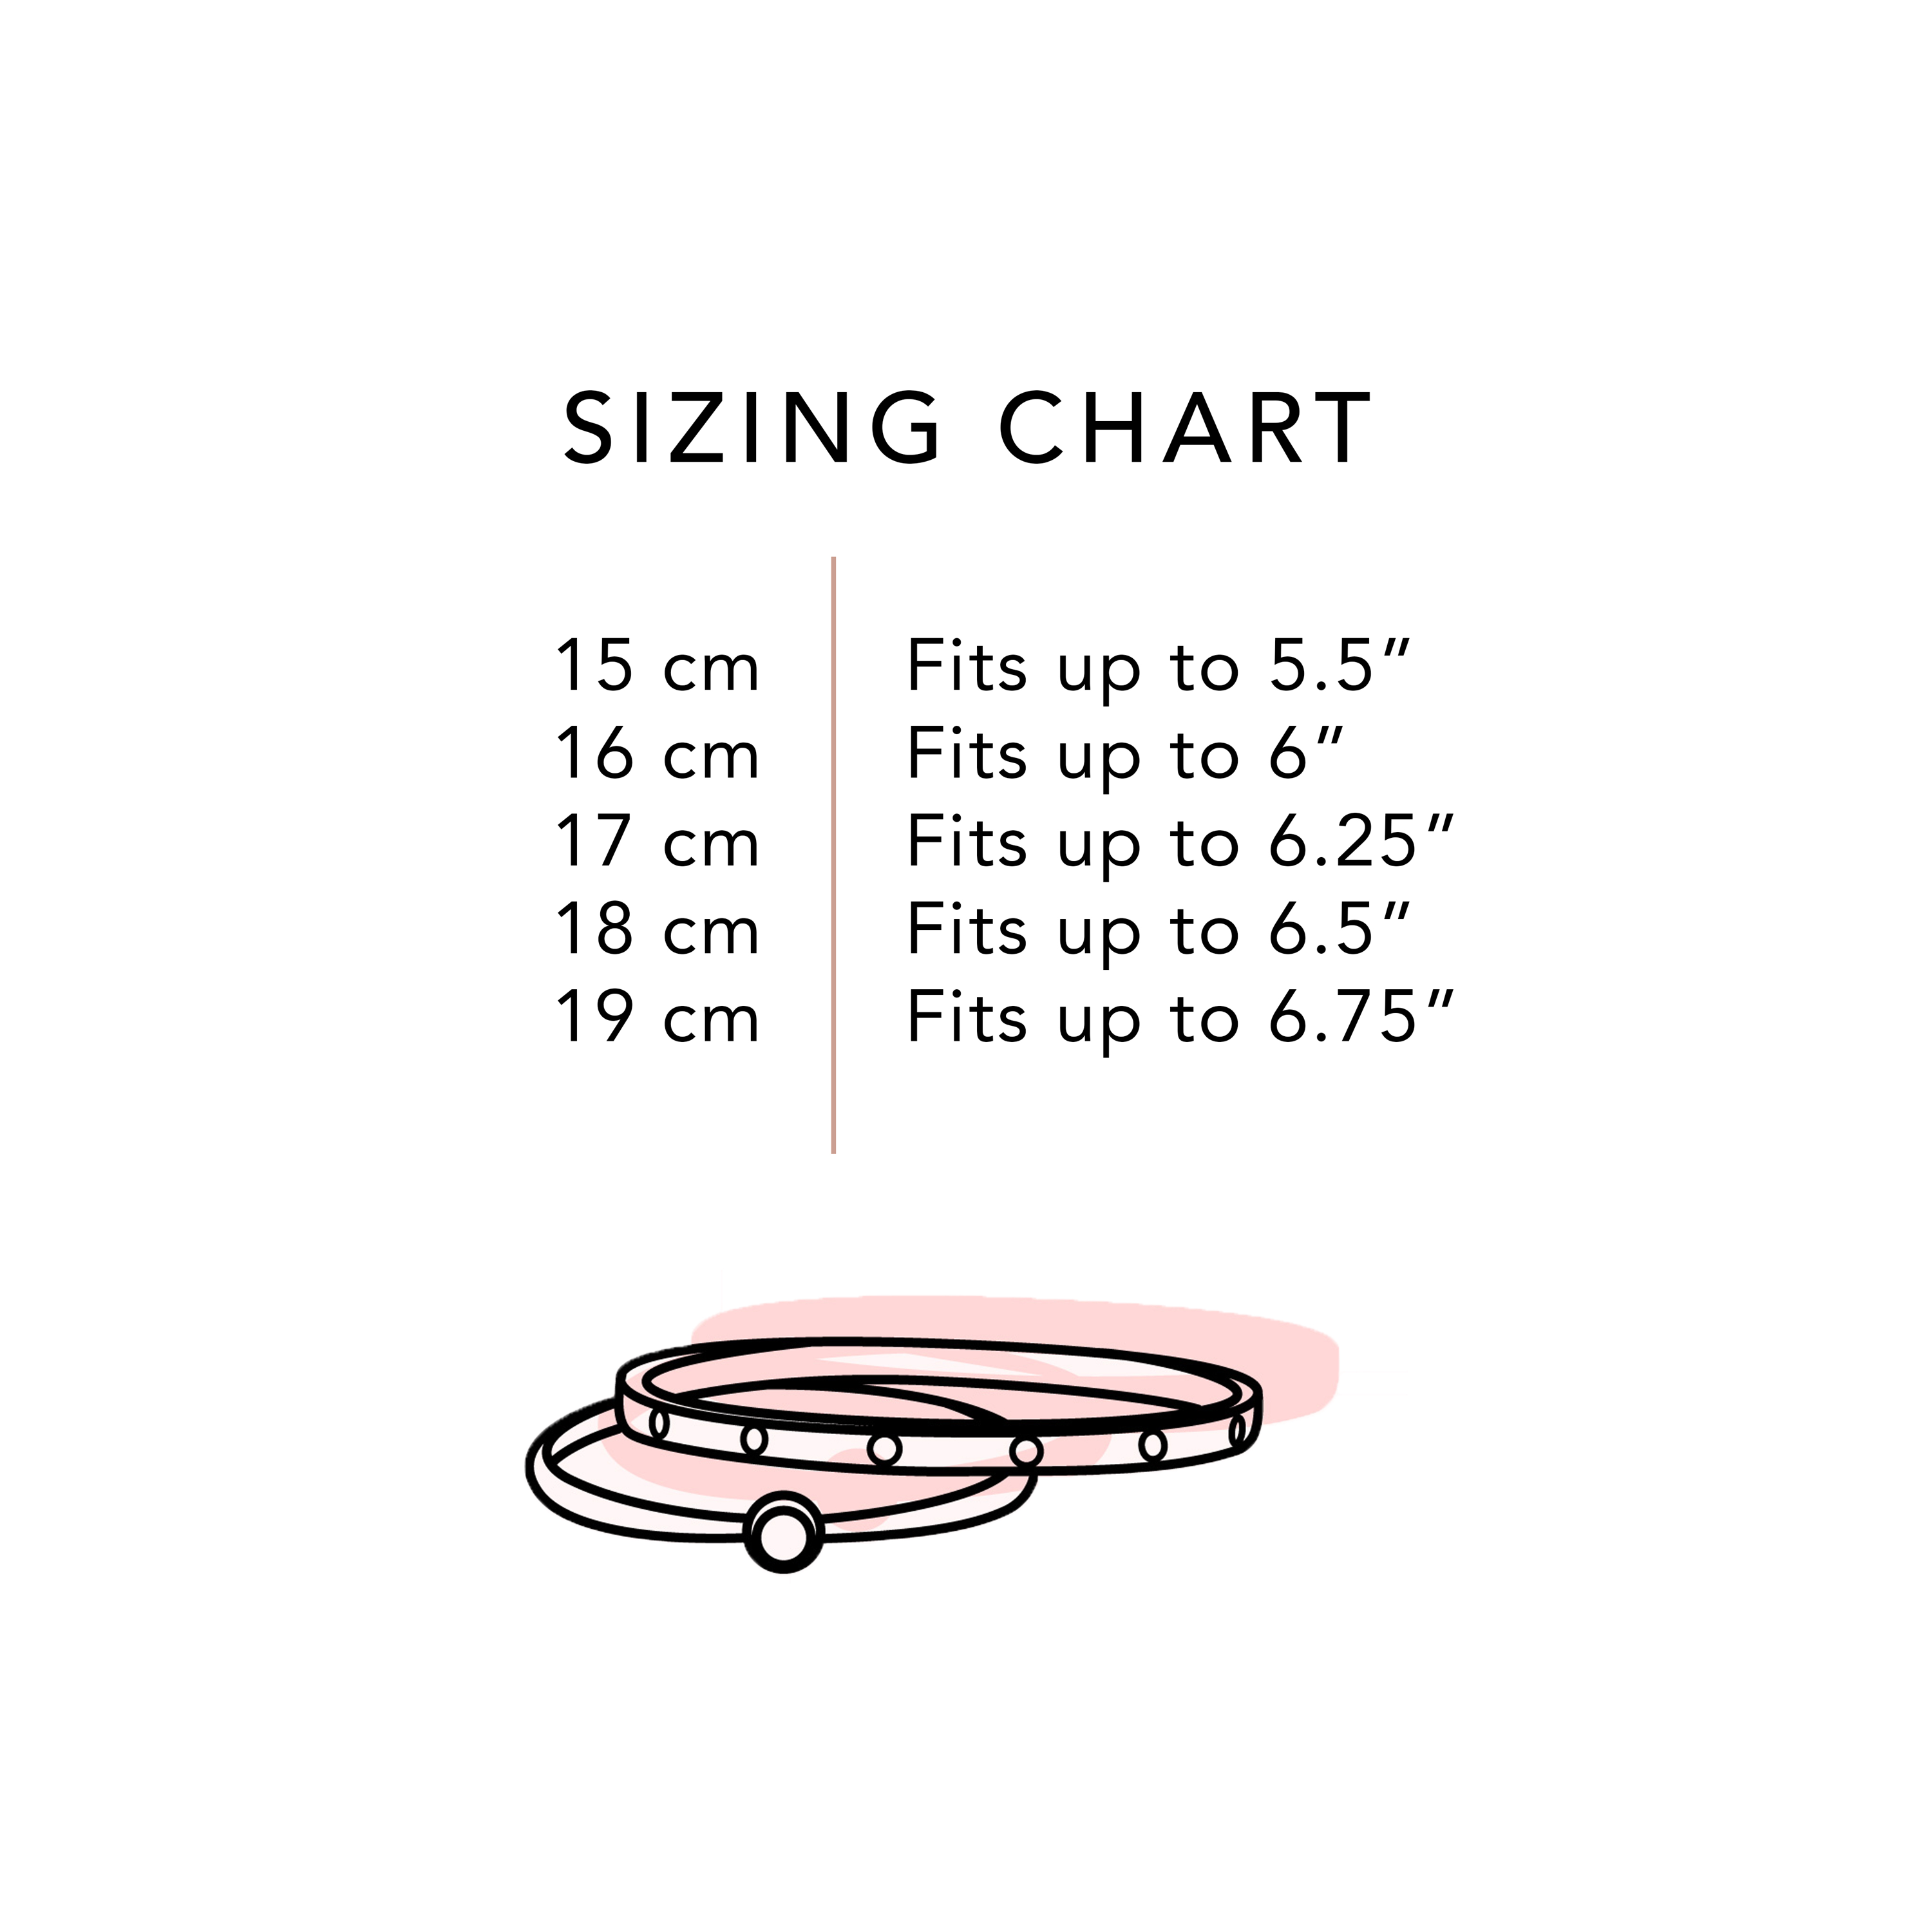 Sizing Chart 15cm fits up to 5.5